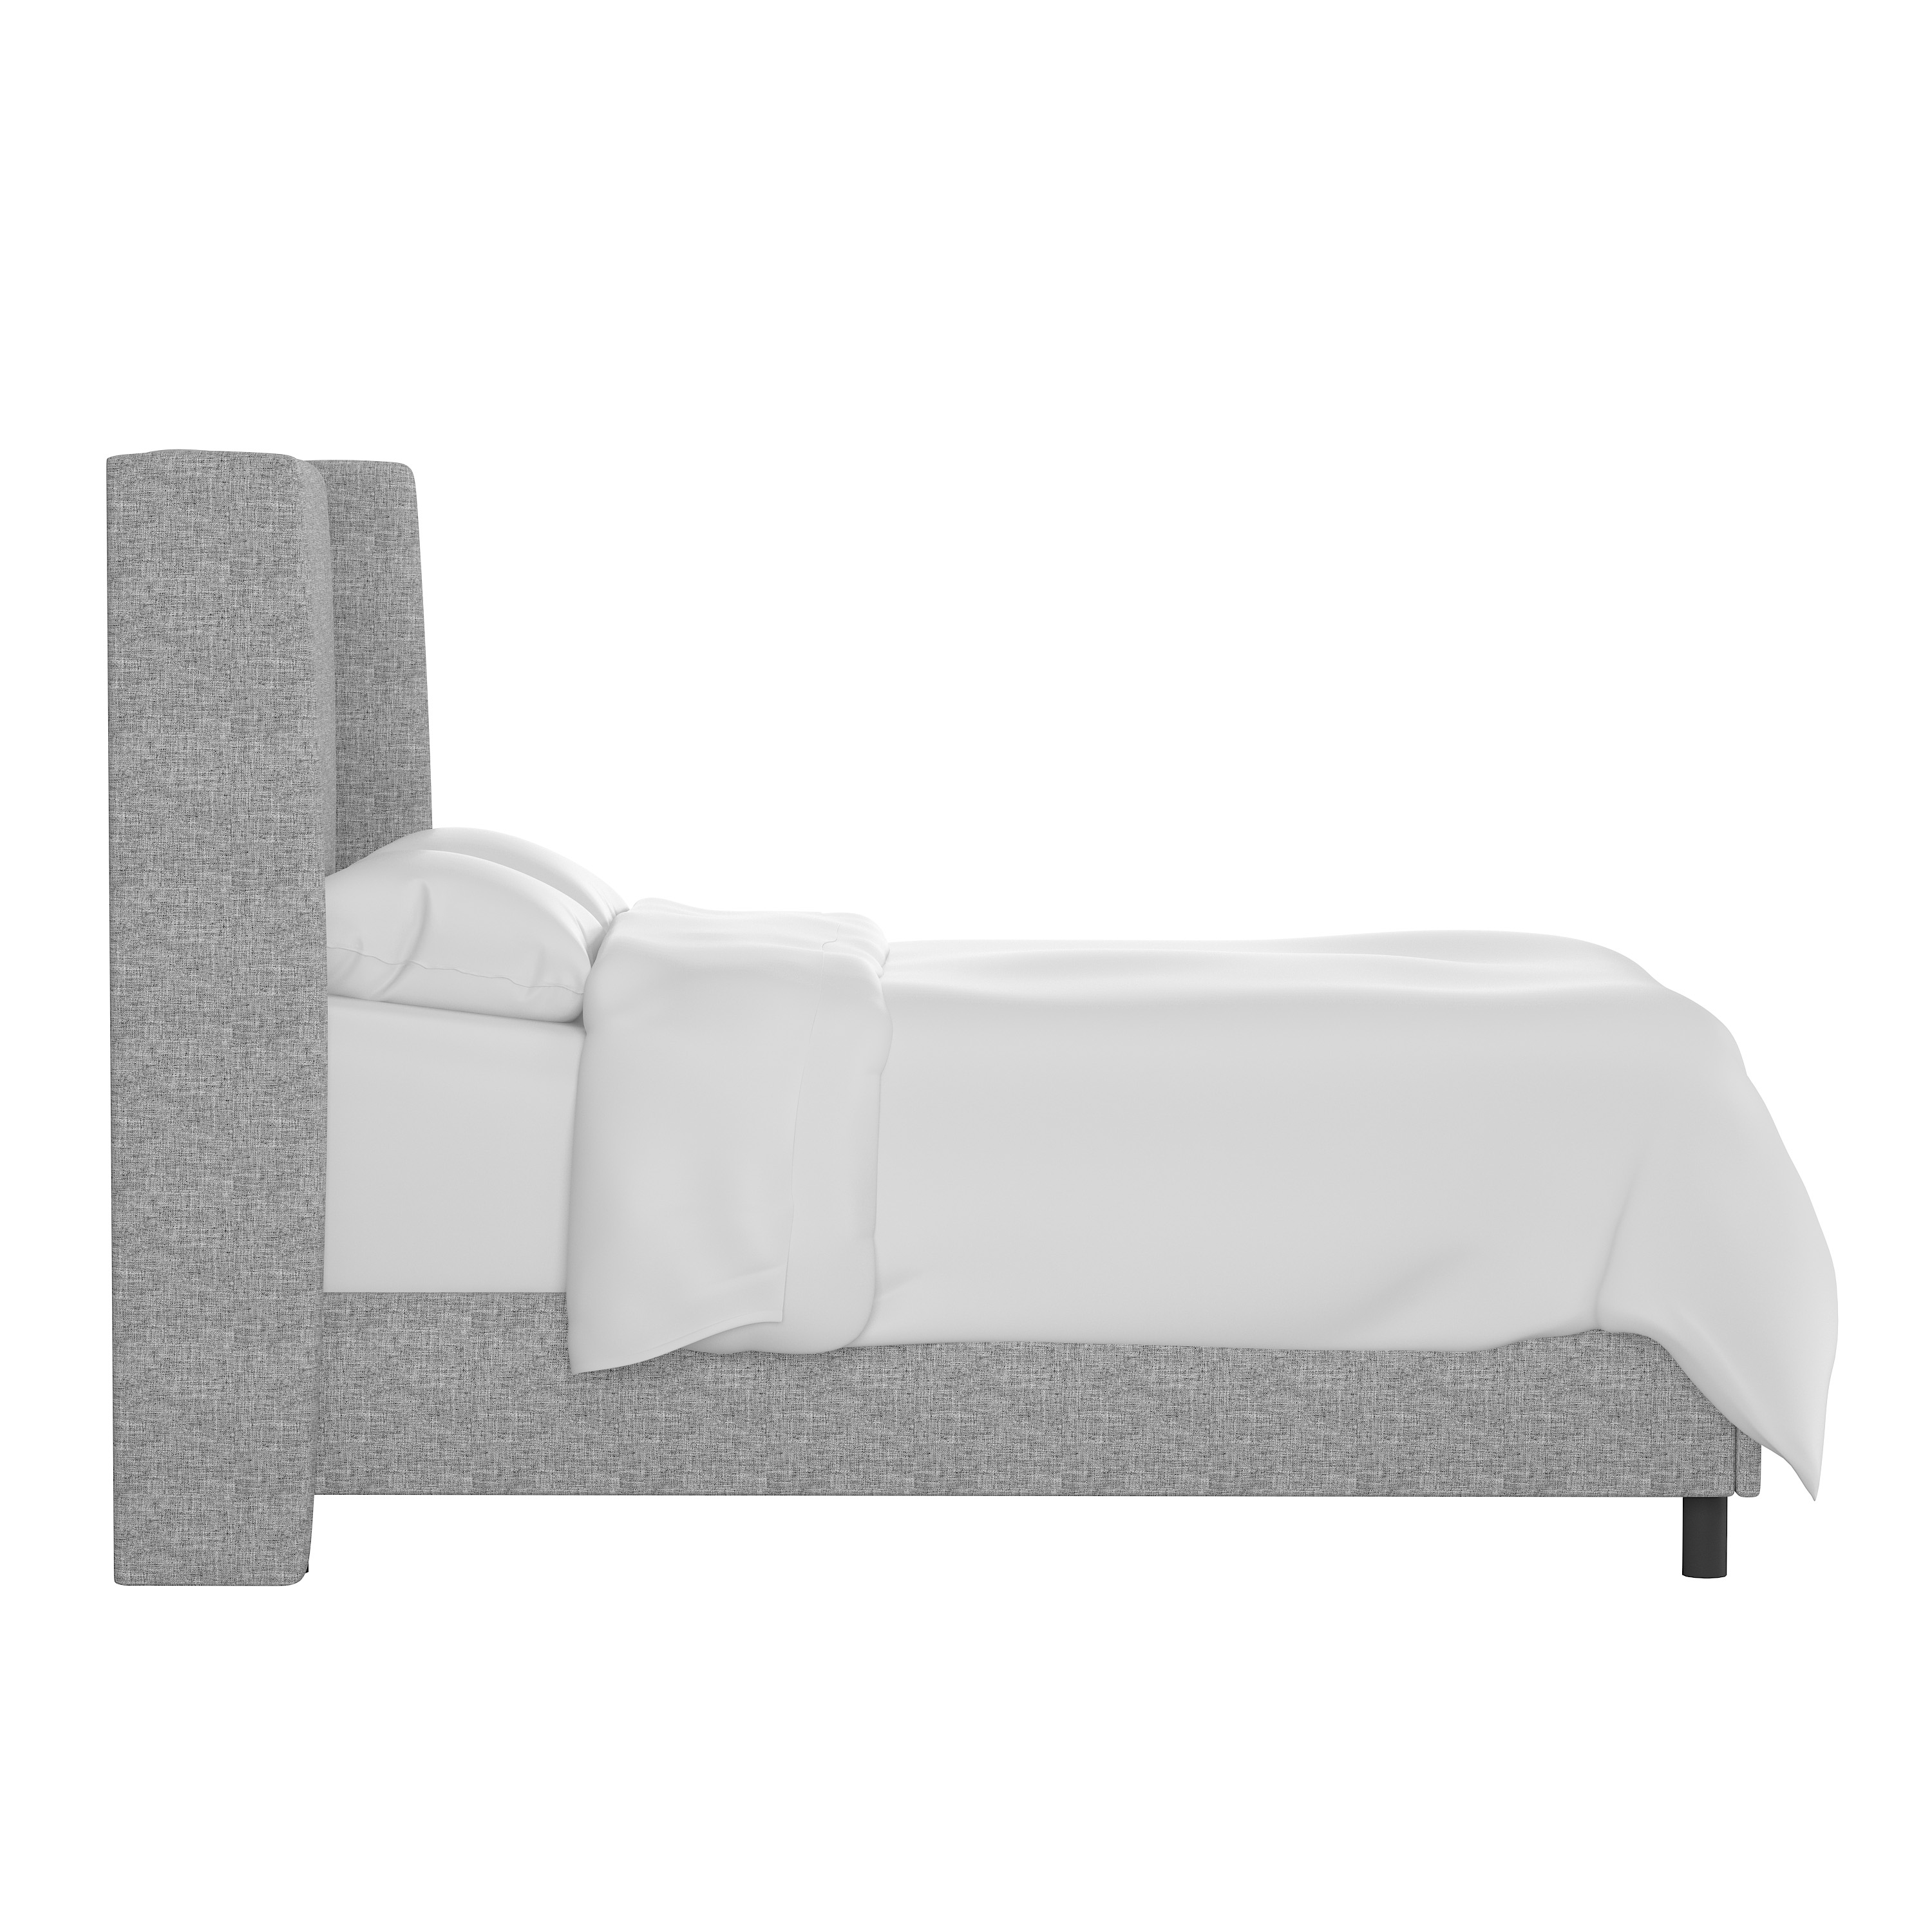 Queen Lawrence Wingback Bed in Zuma Pumice - Image 2